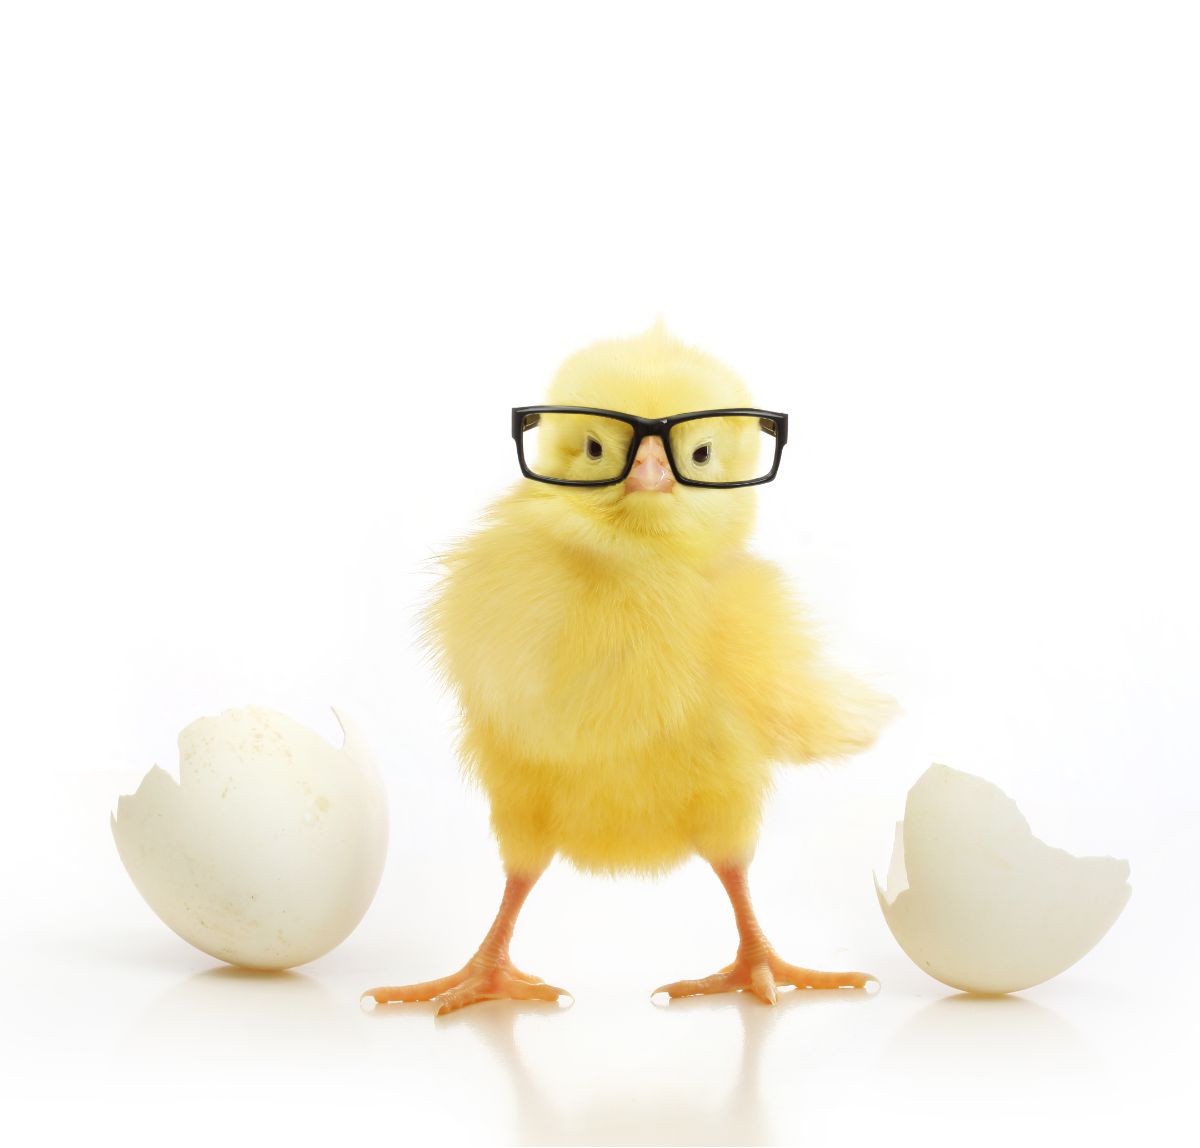 Cute chick with glasses.